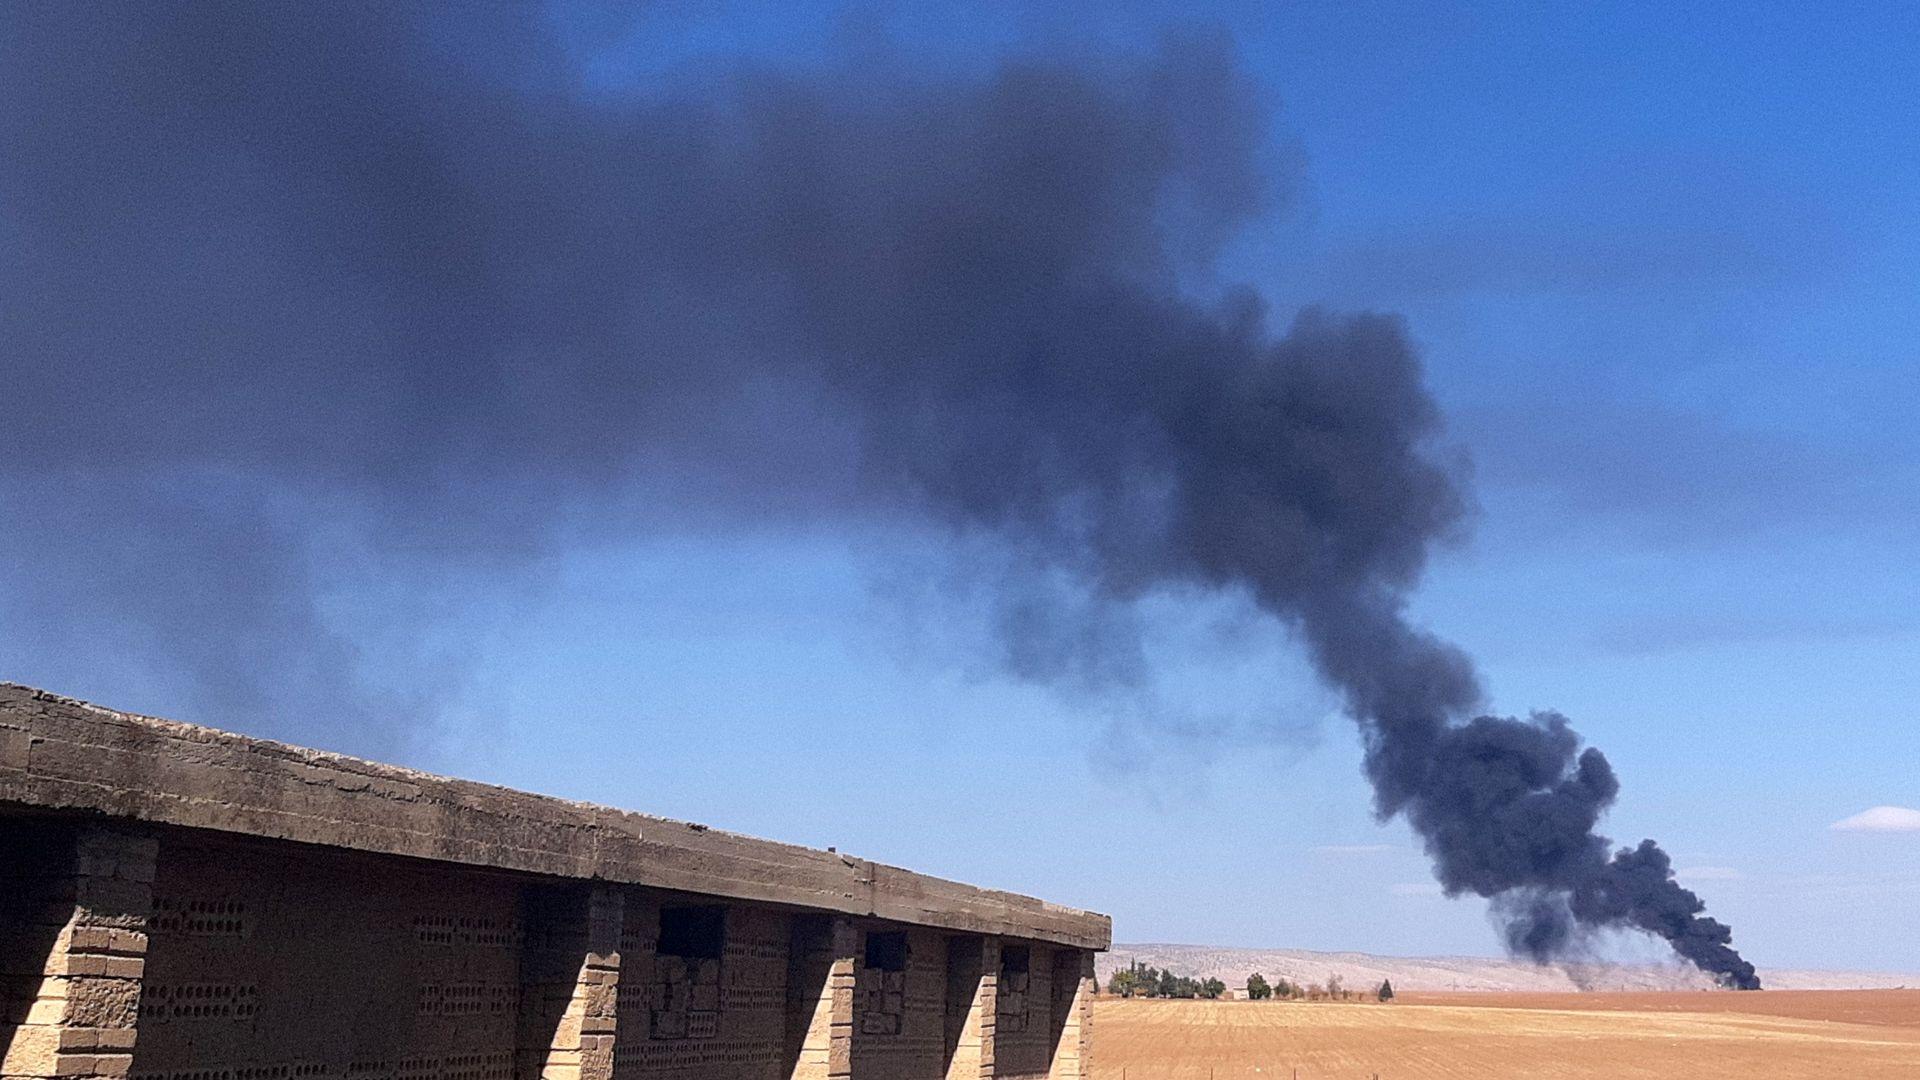 Smoke plumes rise in a field following reported Turkish drone strikes near the town of al-Qahtaniyah in Syria's northeastern Hasakah province, close to the border with Turkey, on Nov. 23.